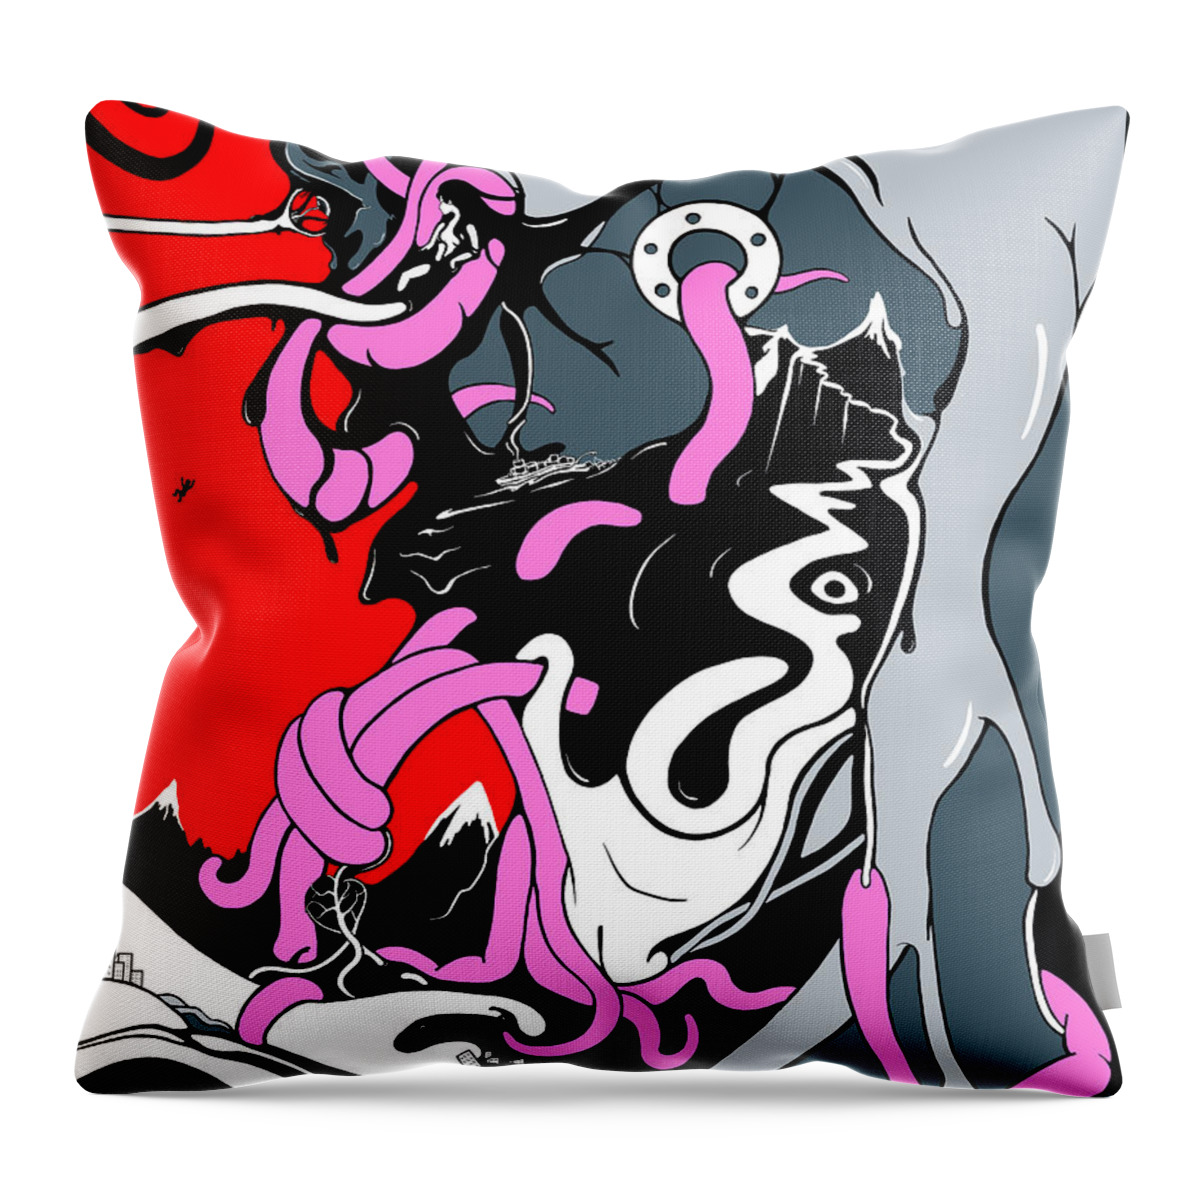 Insanity Throw Pillow featuring the digital art Insanity by Craig Tilley